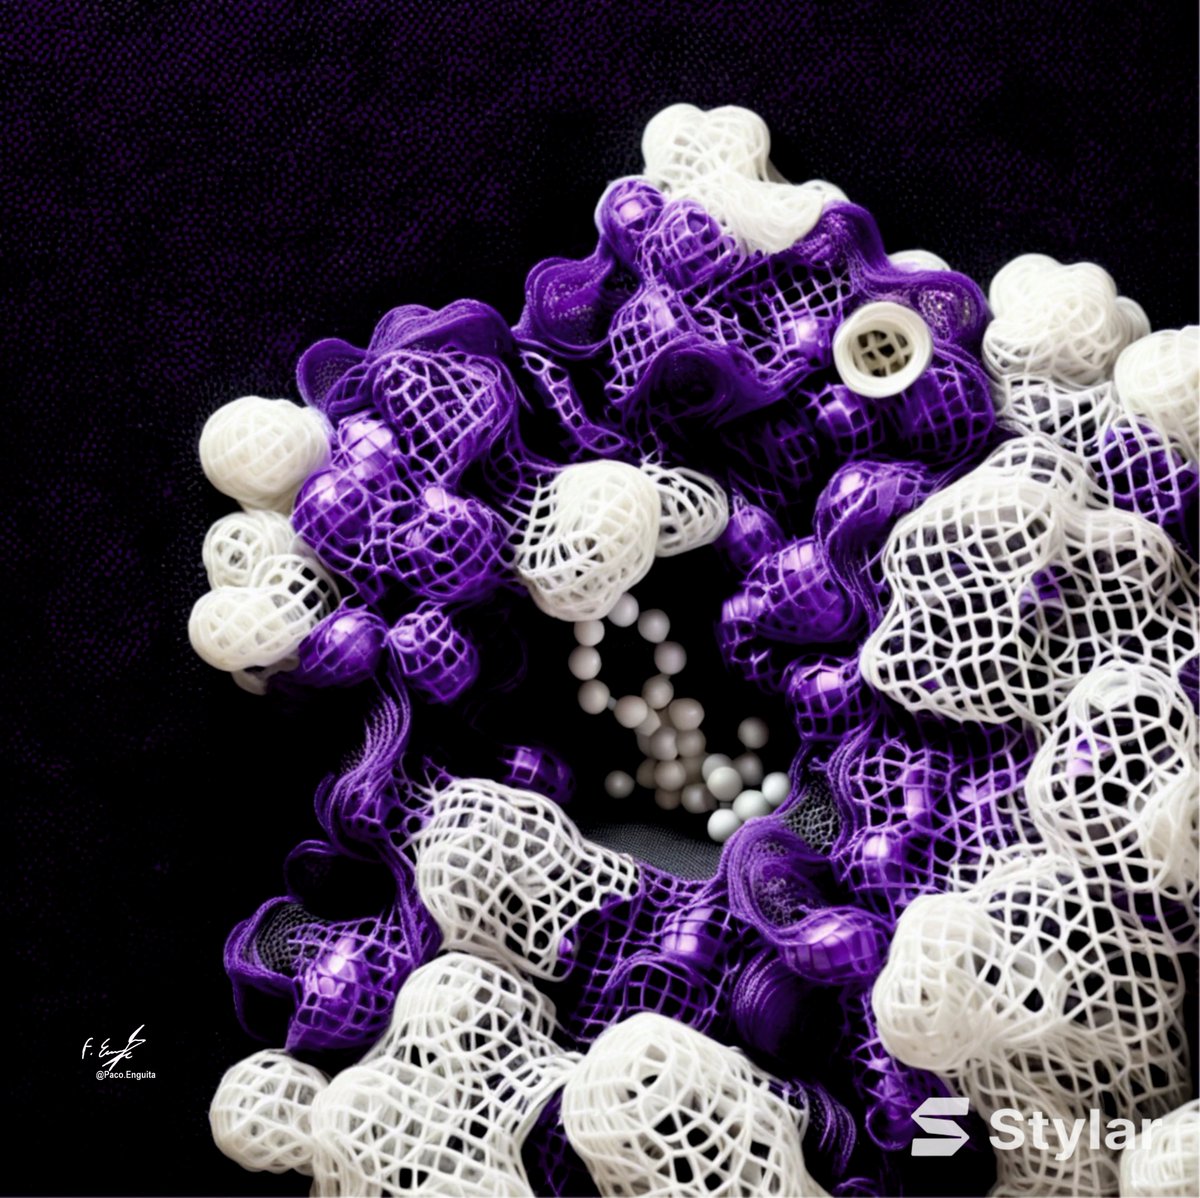 Crystal structure of the human carbonic anhydrase II in complex with a covalent inhibitor (PDB code: 8OO8) #scivis #molecularart #sciart @stylar_ai @proteinimaging 
behance.net/gallery/195996…